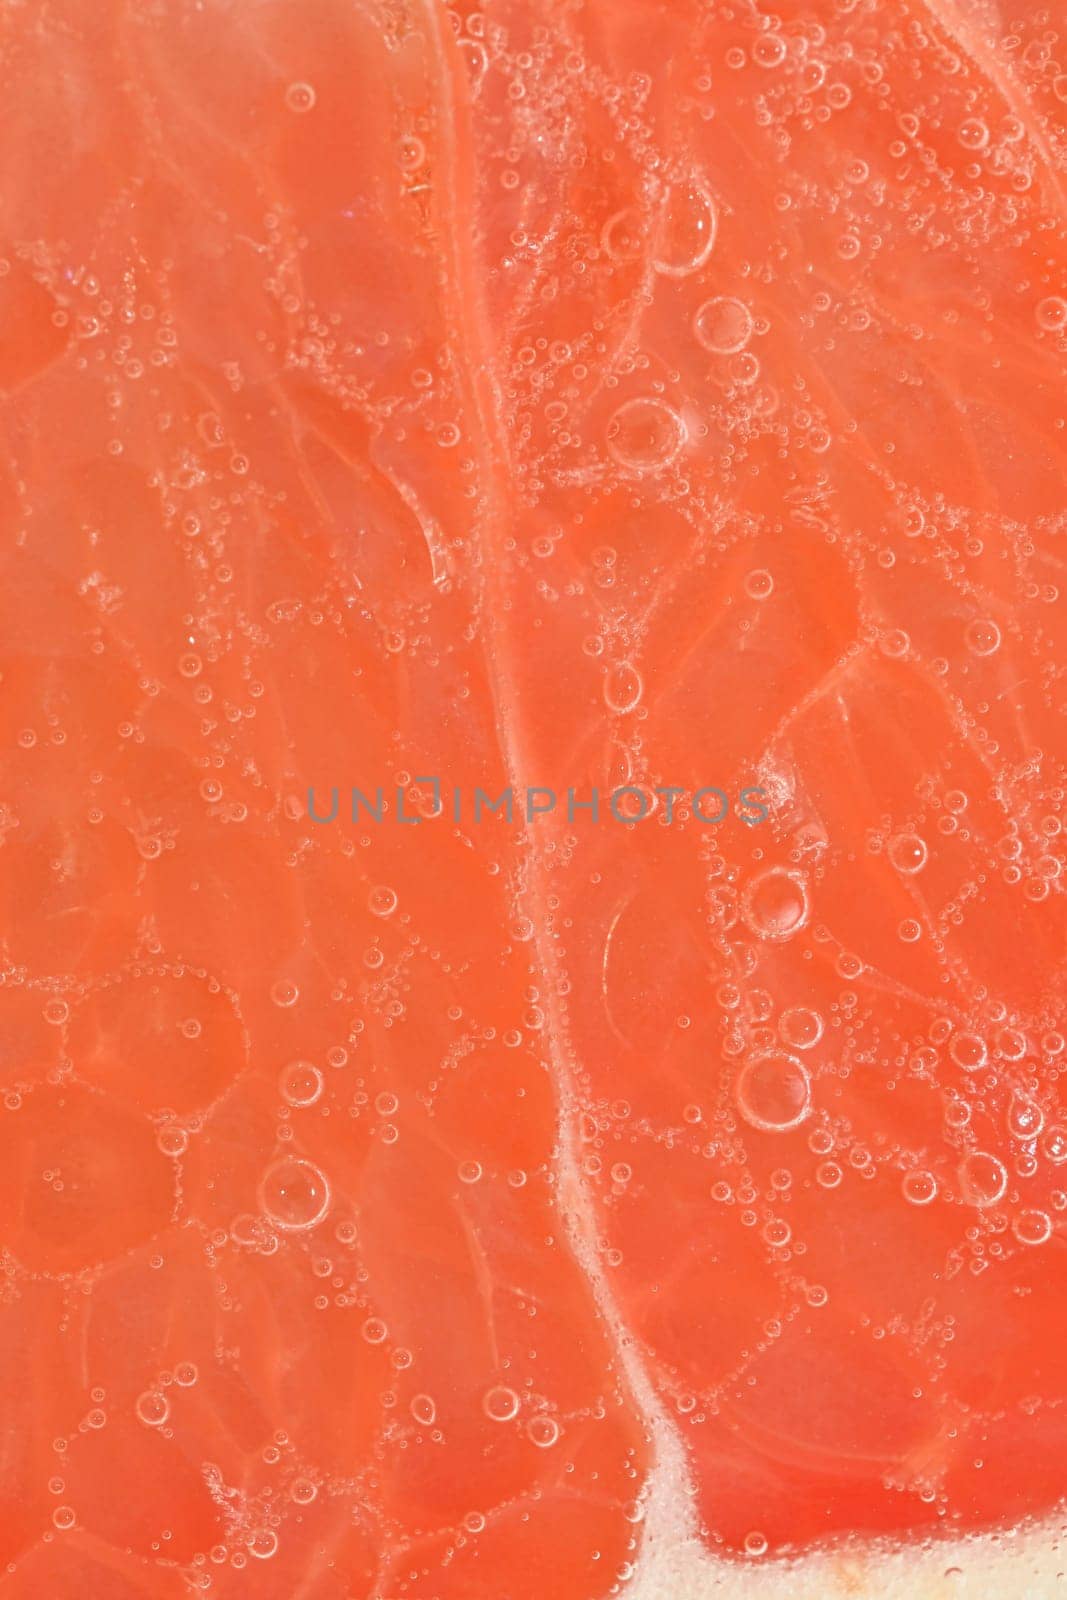 Slice of ripe grapefruit in water. Close-up of grapefruit in liquid with bubbles. Slice of ripe grapefruit in sparkling water. Macro image of fruit in carbonated water. Abstract and background